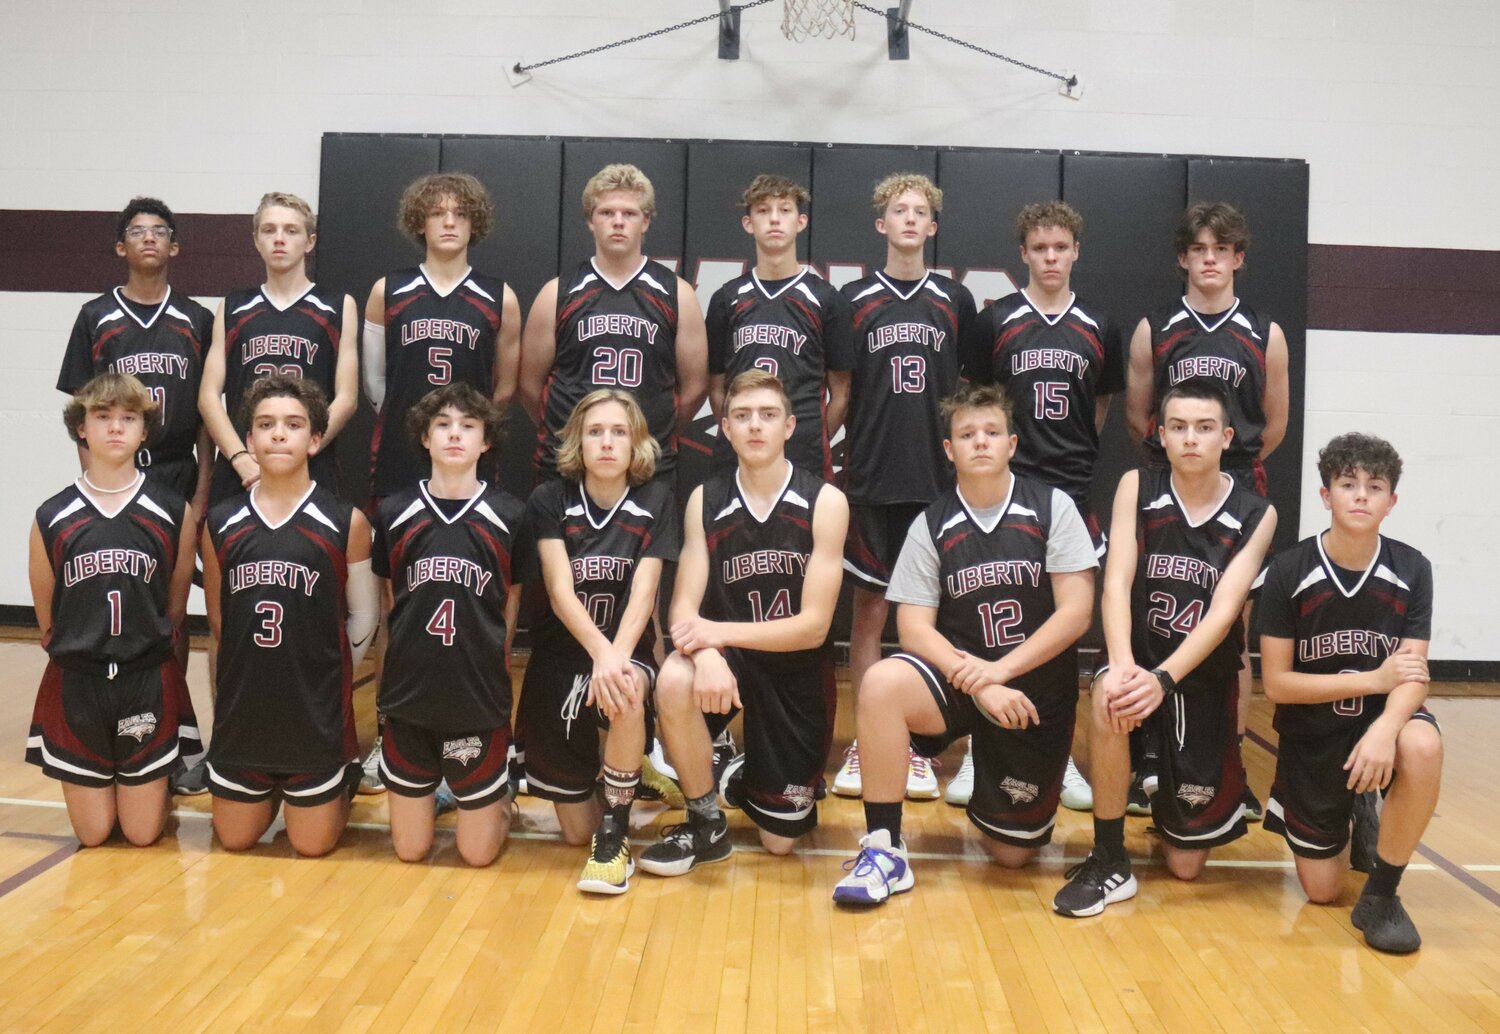 Members of the Liberty Christian boys basketball team are front row, from left: Eathan Roach, Ryder Carlisle, Phoenix Obermann, Cole Melson, Boaz Grimstead, Mitchell Scheer, Tucker Wainscott and Cooper Dickinson. Back row, from left: Julius Amann, Clinton Queen, Levi Coovert, Willy Mueller, Tommy Meyer, RJ Hoffman, Brody Kuehn and Jack Duvel.